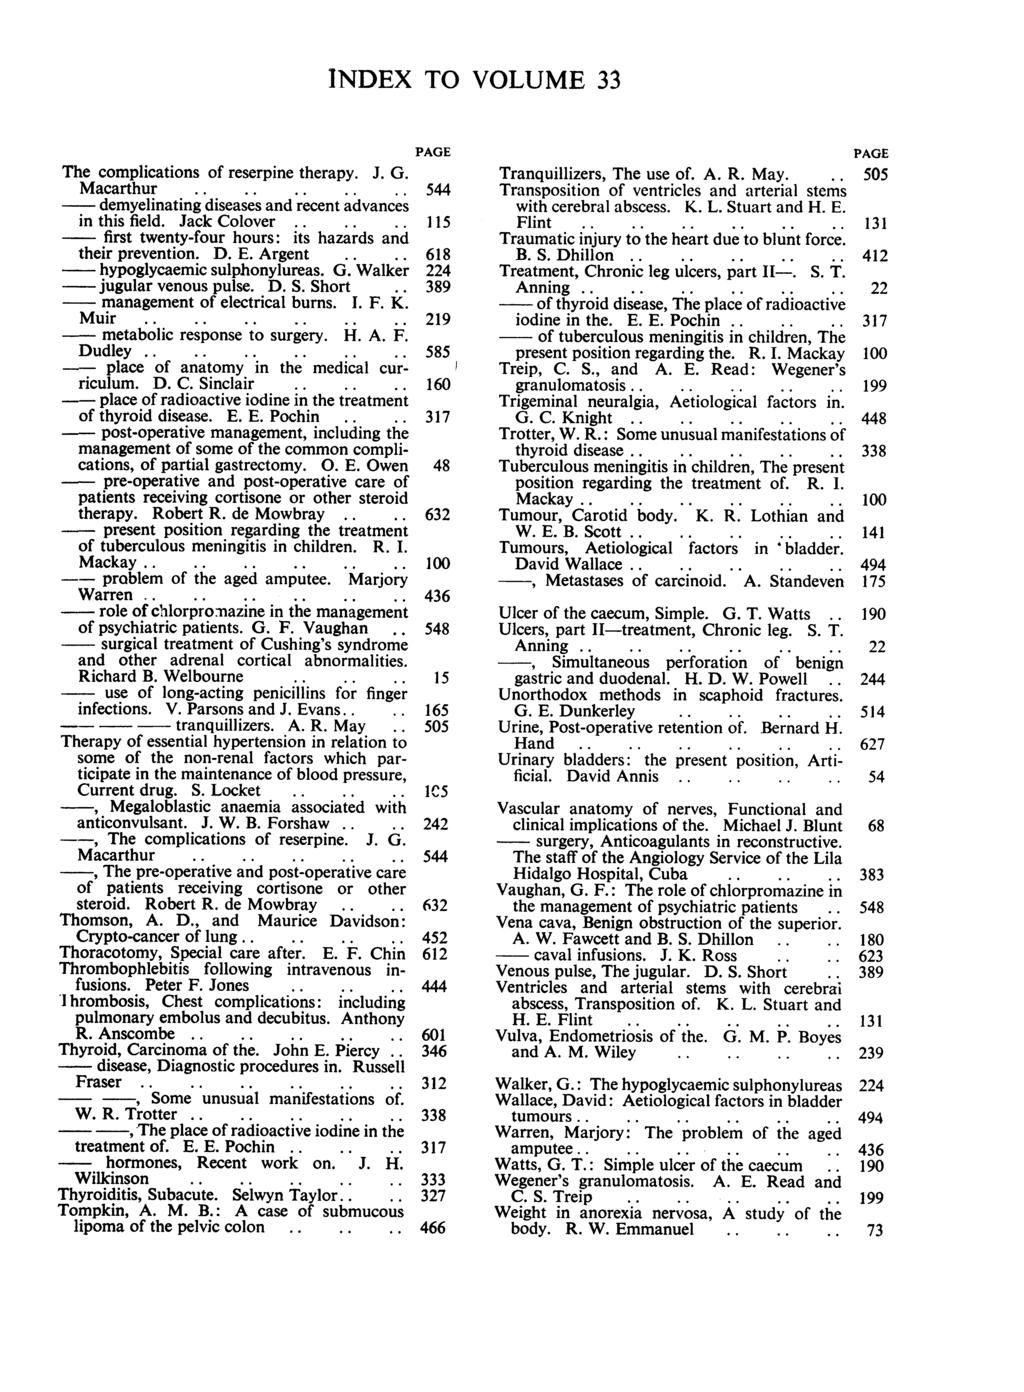 INDEX TO VOLUME 33 The complications of reserpine therapy. J. G. Macarthur..... 544 - demyelinating diseases and recent advances in this field. Jack Colover.